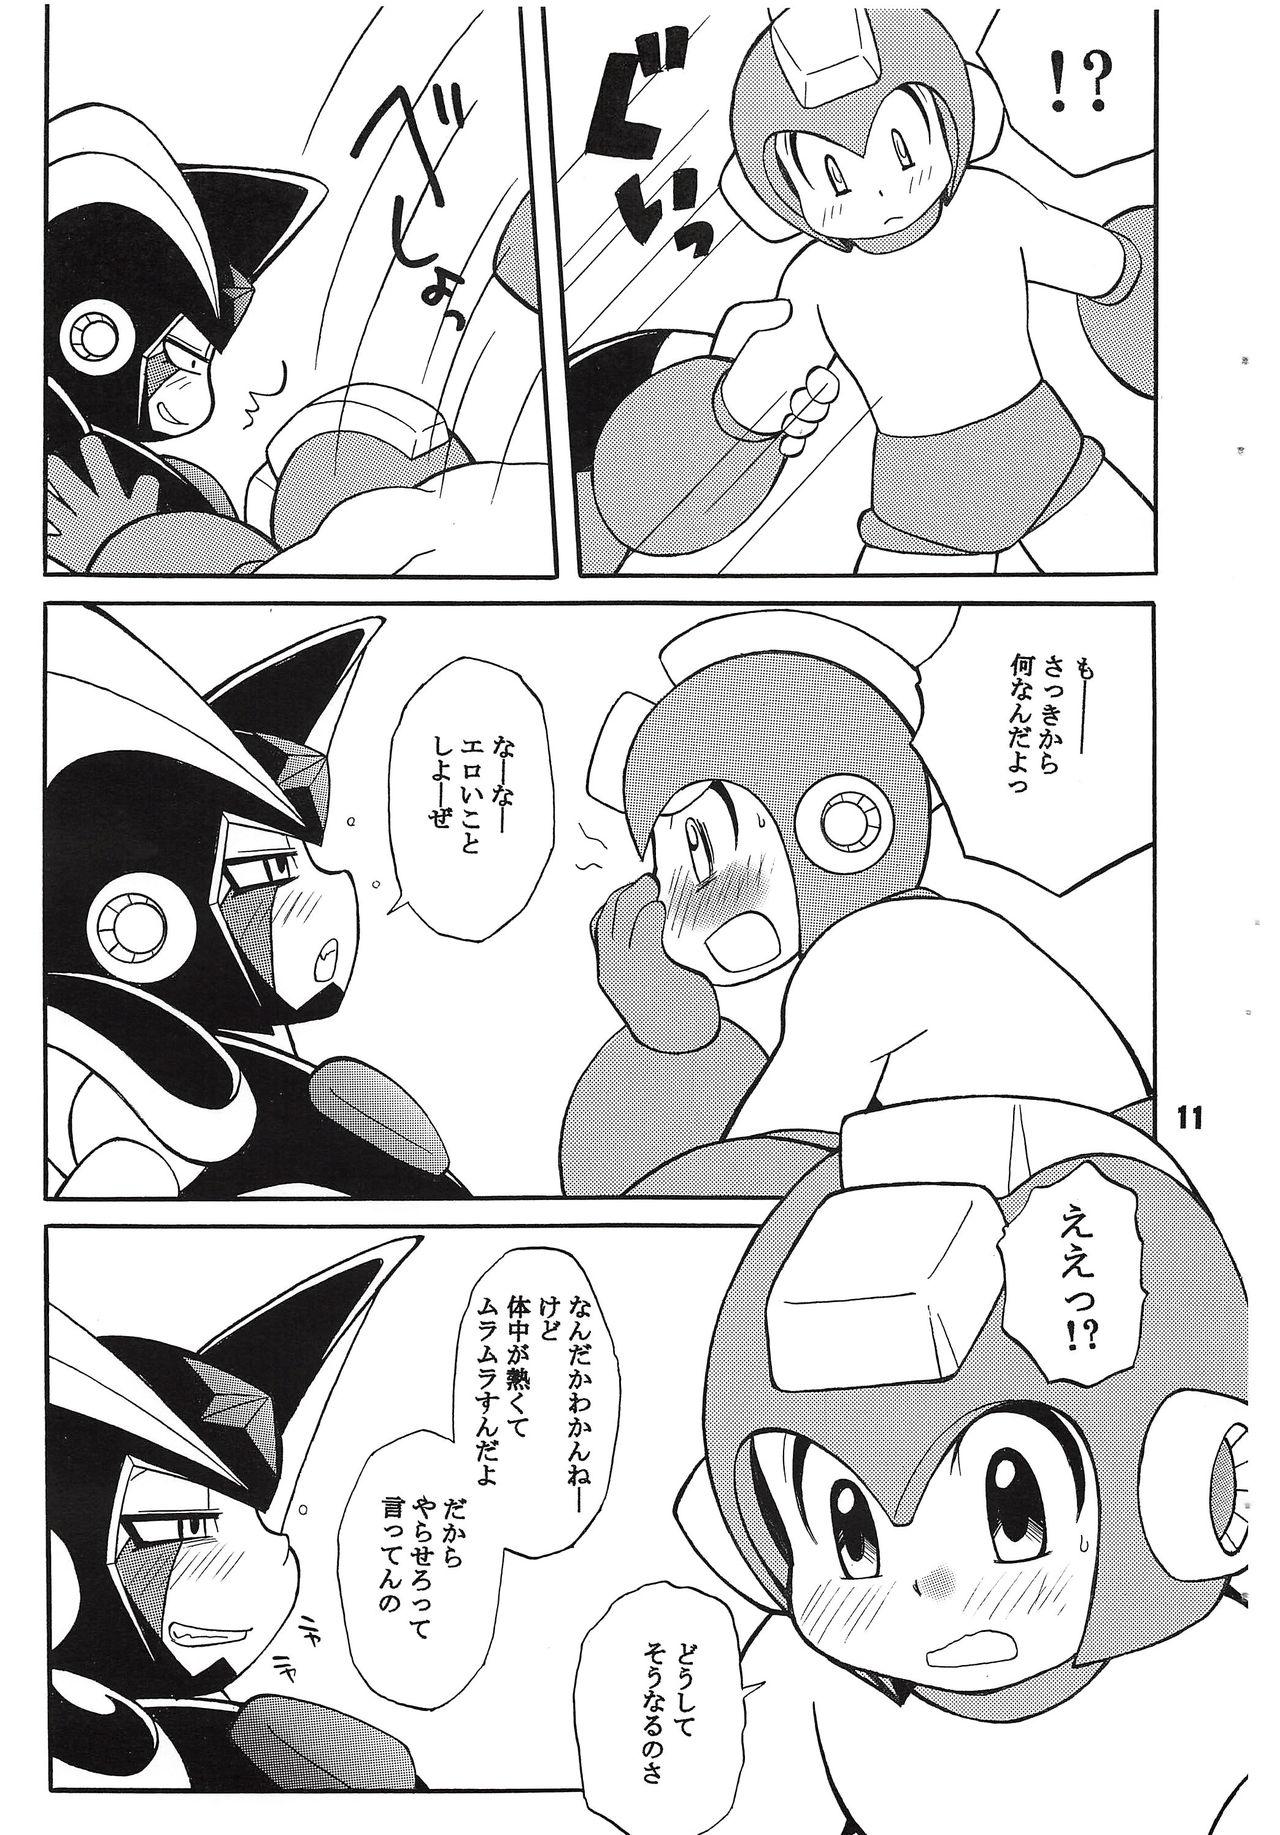 Red BASS DRUNKER - Megaman Hoe - Page 11